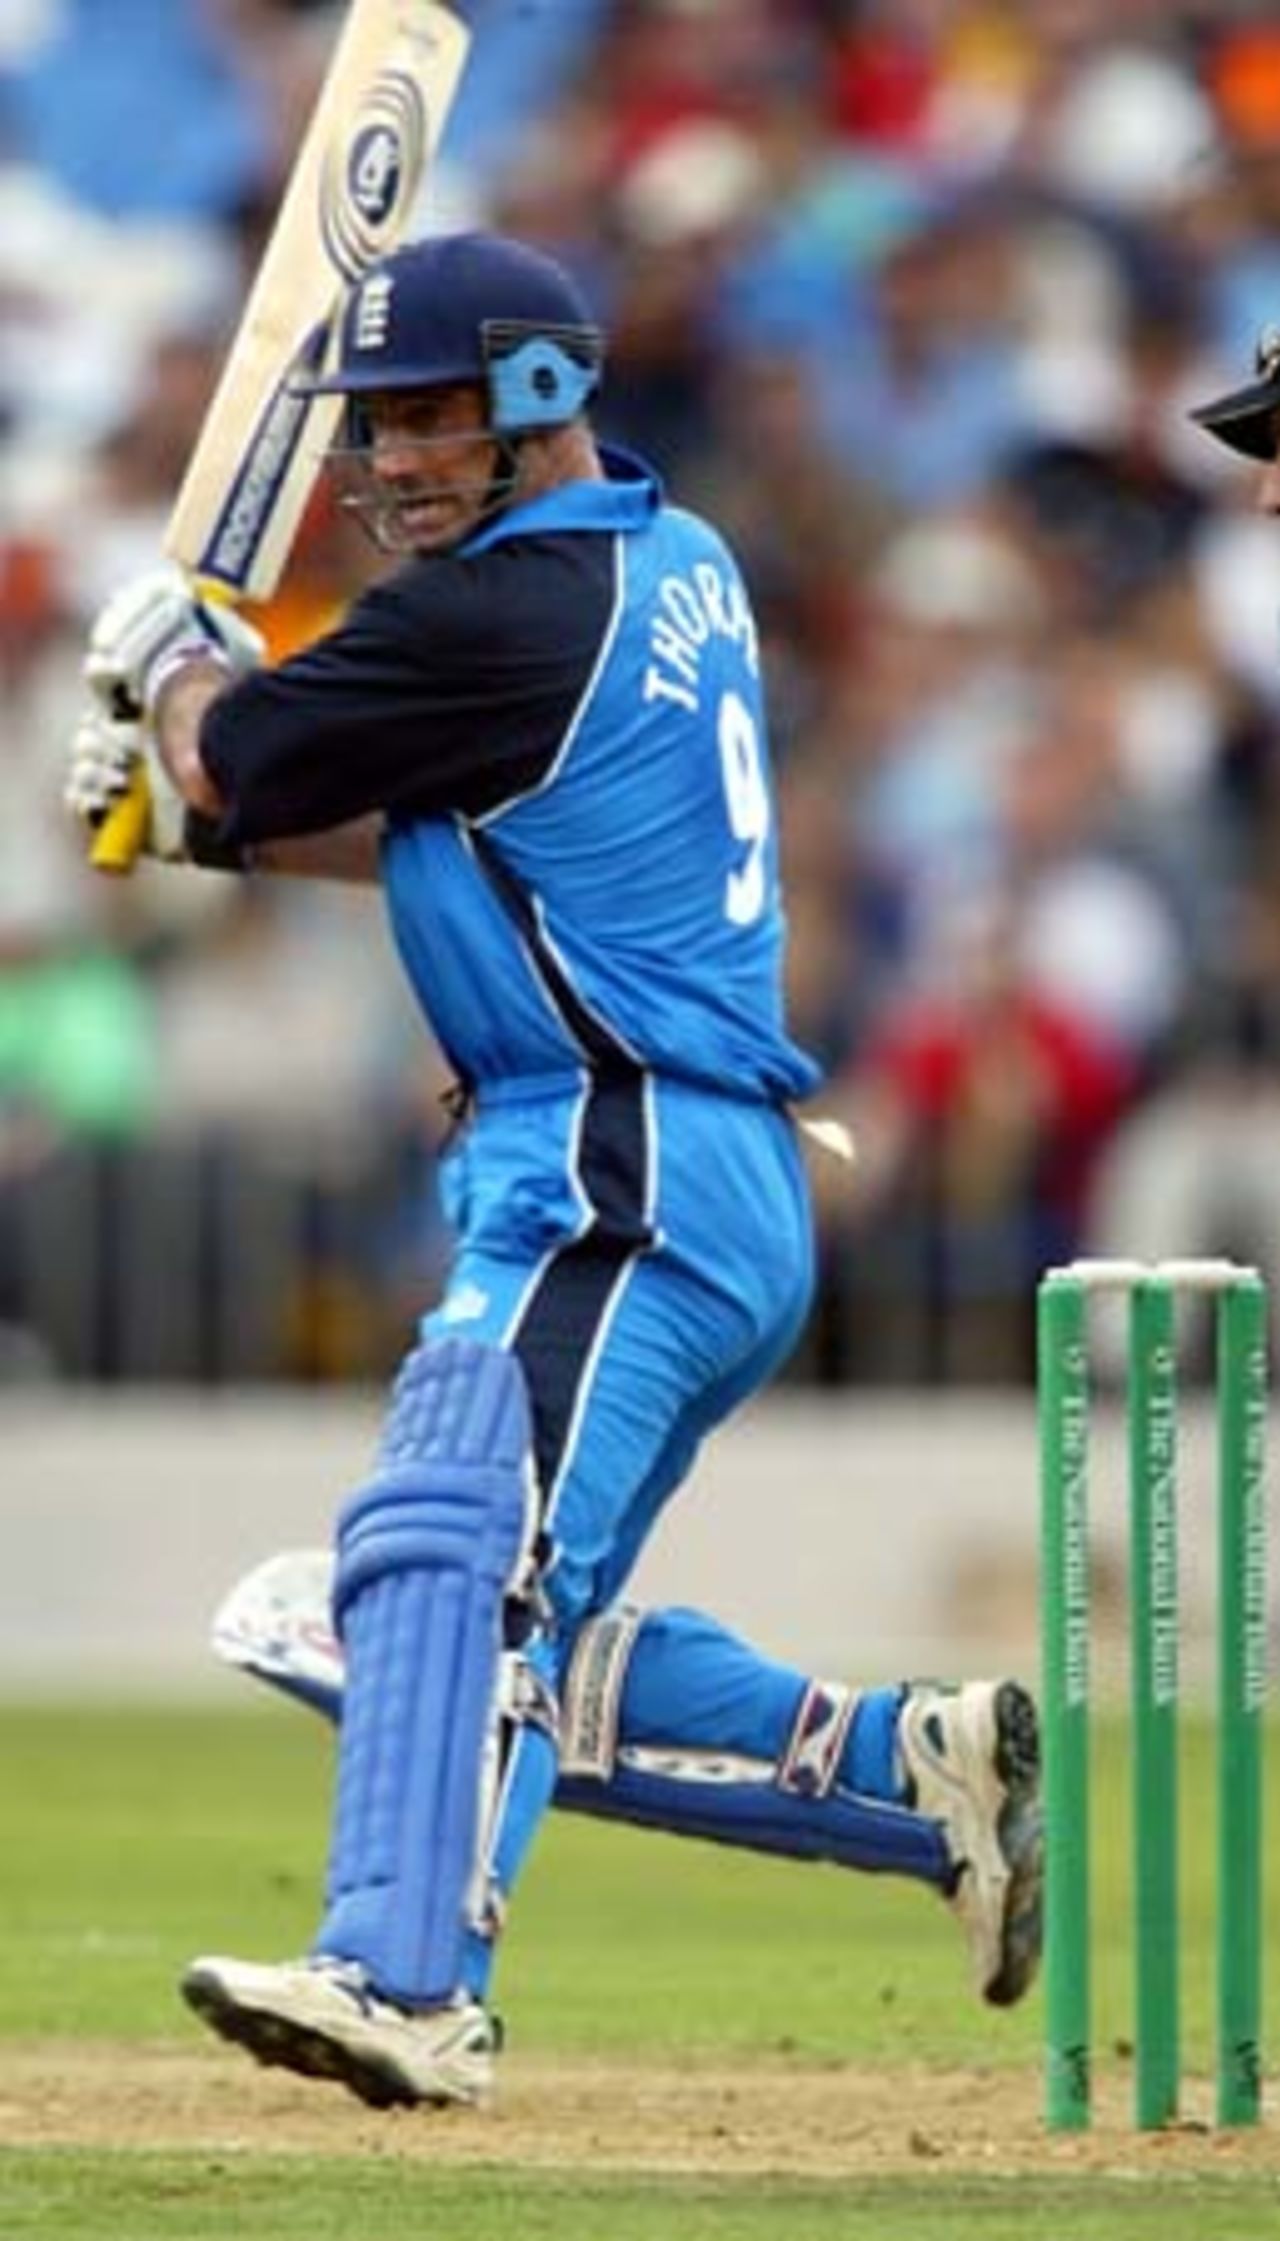 England batsman Graham Thorpe cuts a delivery during his innings of 59 not out. 4th ODI: New Zealand v England at Eden Park, Auckland, 23 February 2002.